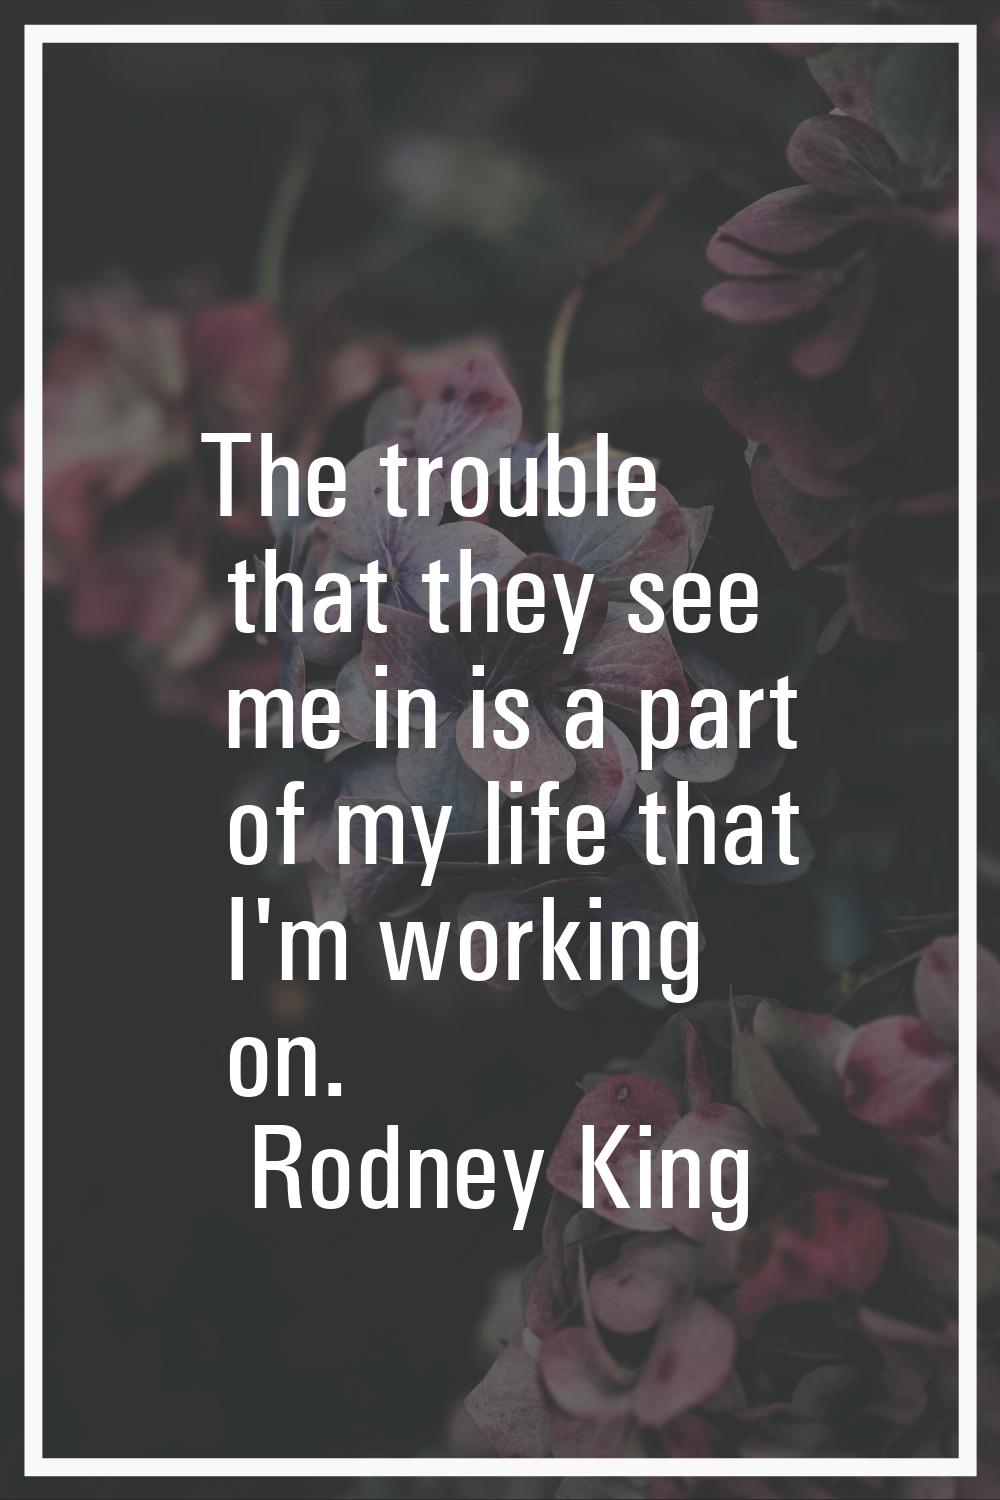 The trouble that they see me in is a part of my life that I'm working on.